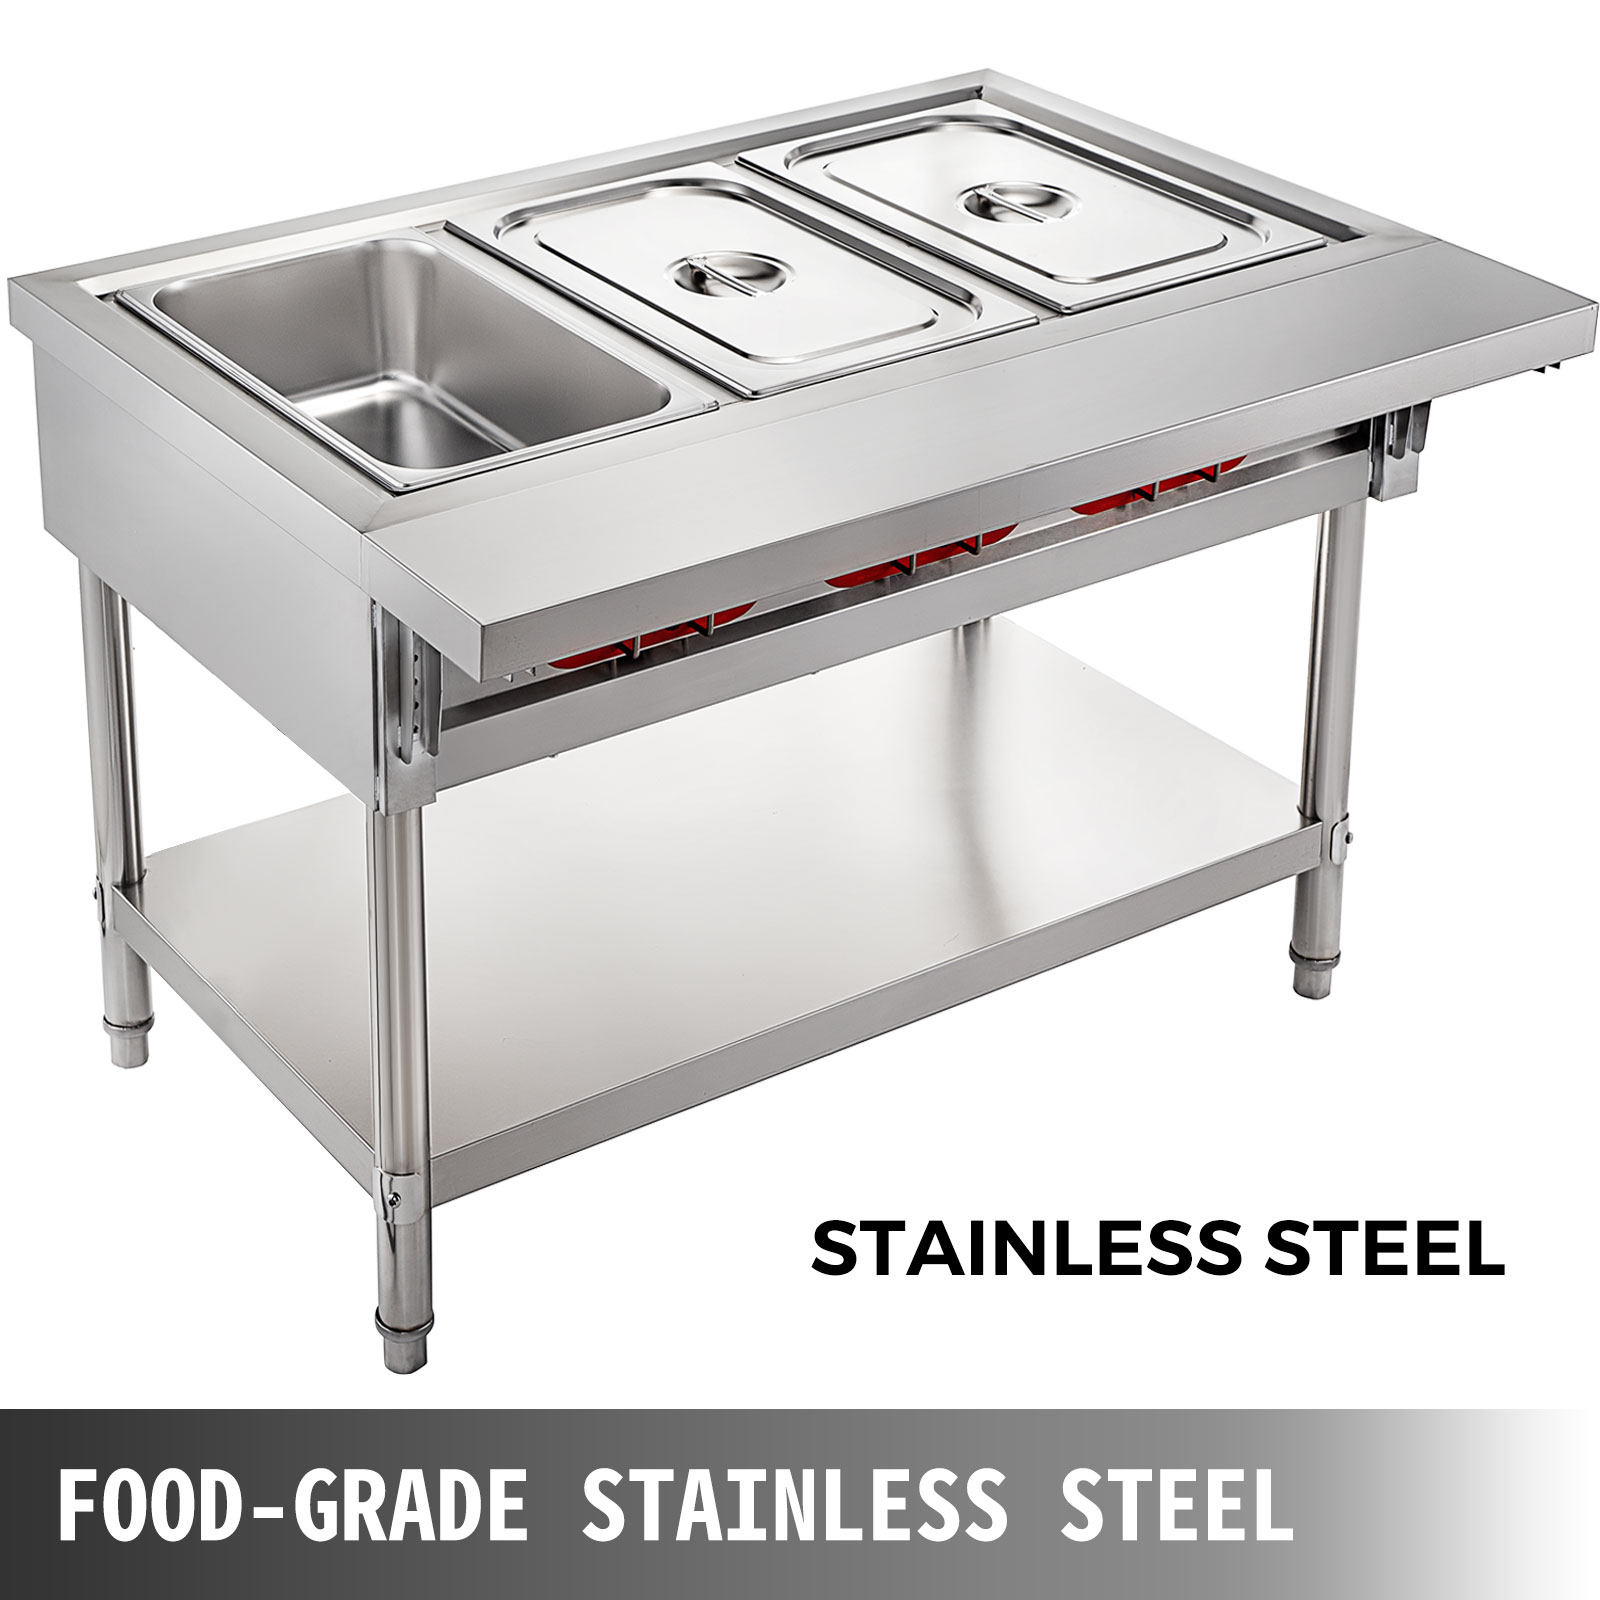 Details about   Commercial Electric Food Warmer Buffet Steam Table Stainless Steel 3 Pan 850W 